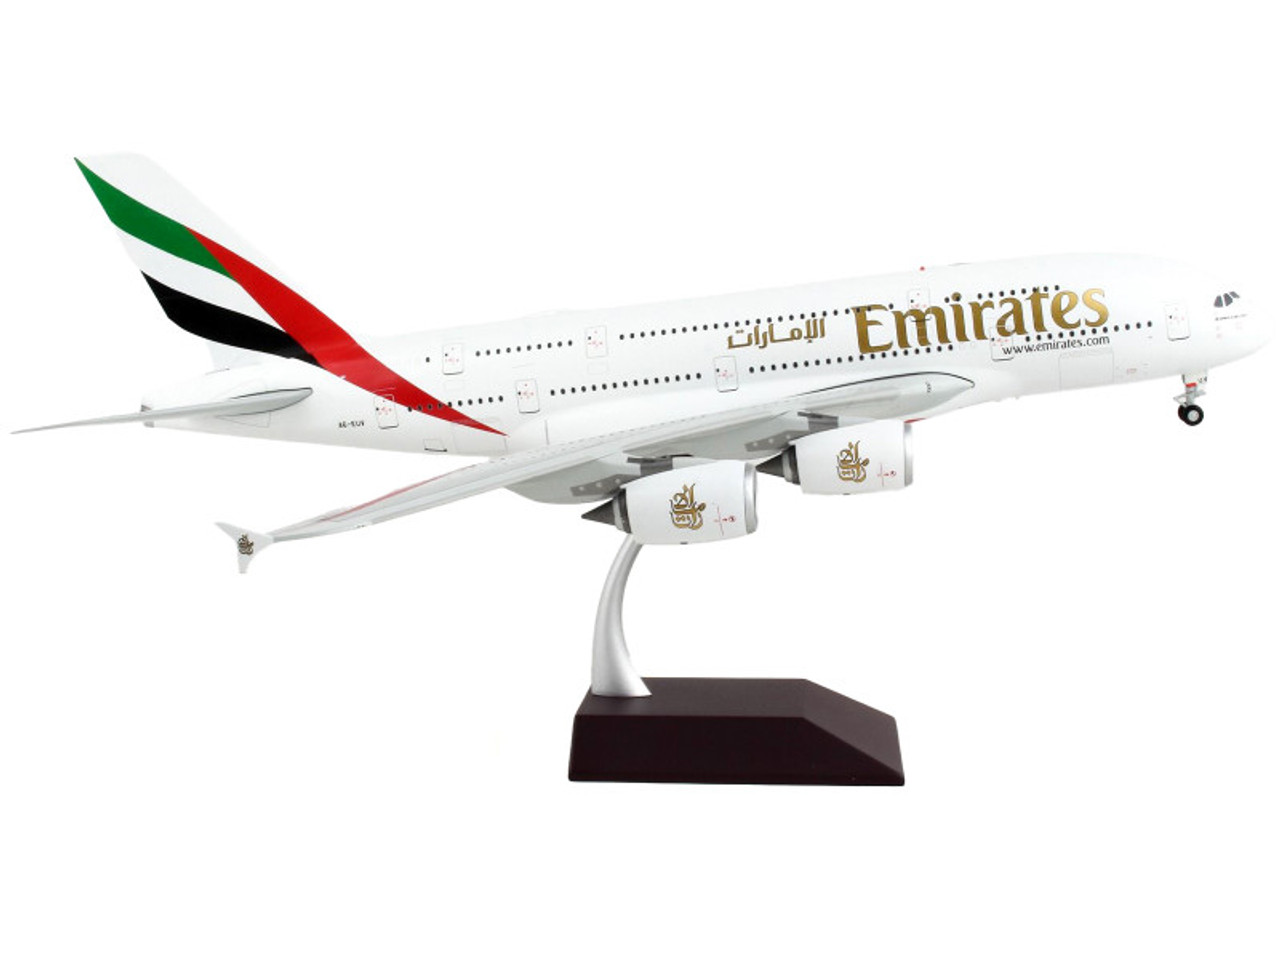 Airbus A380-800 Commercial Aircraft "Emirates Airlines - A6-EUV" White with Striped Tail "Gemini 200" Series 1/200 Diecast Model Airplane by GeminiJets